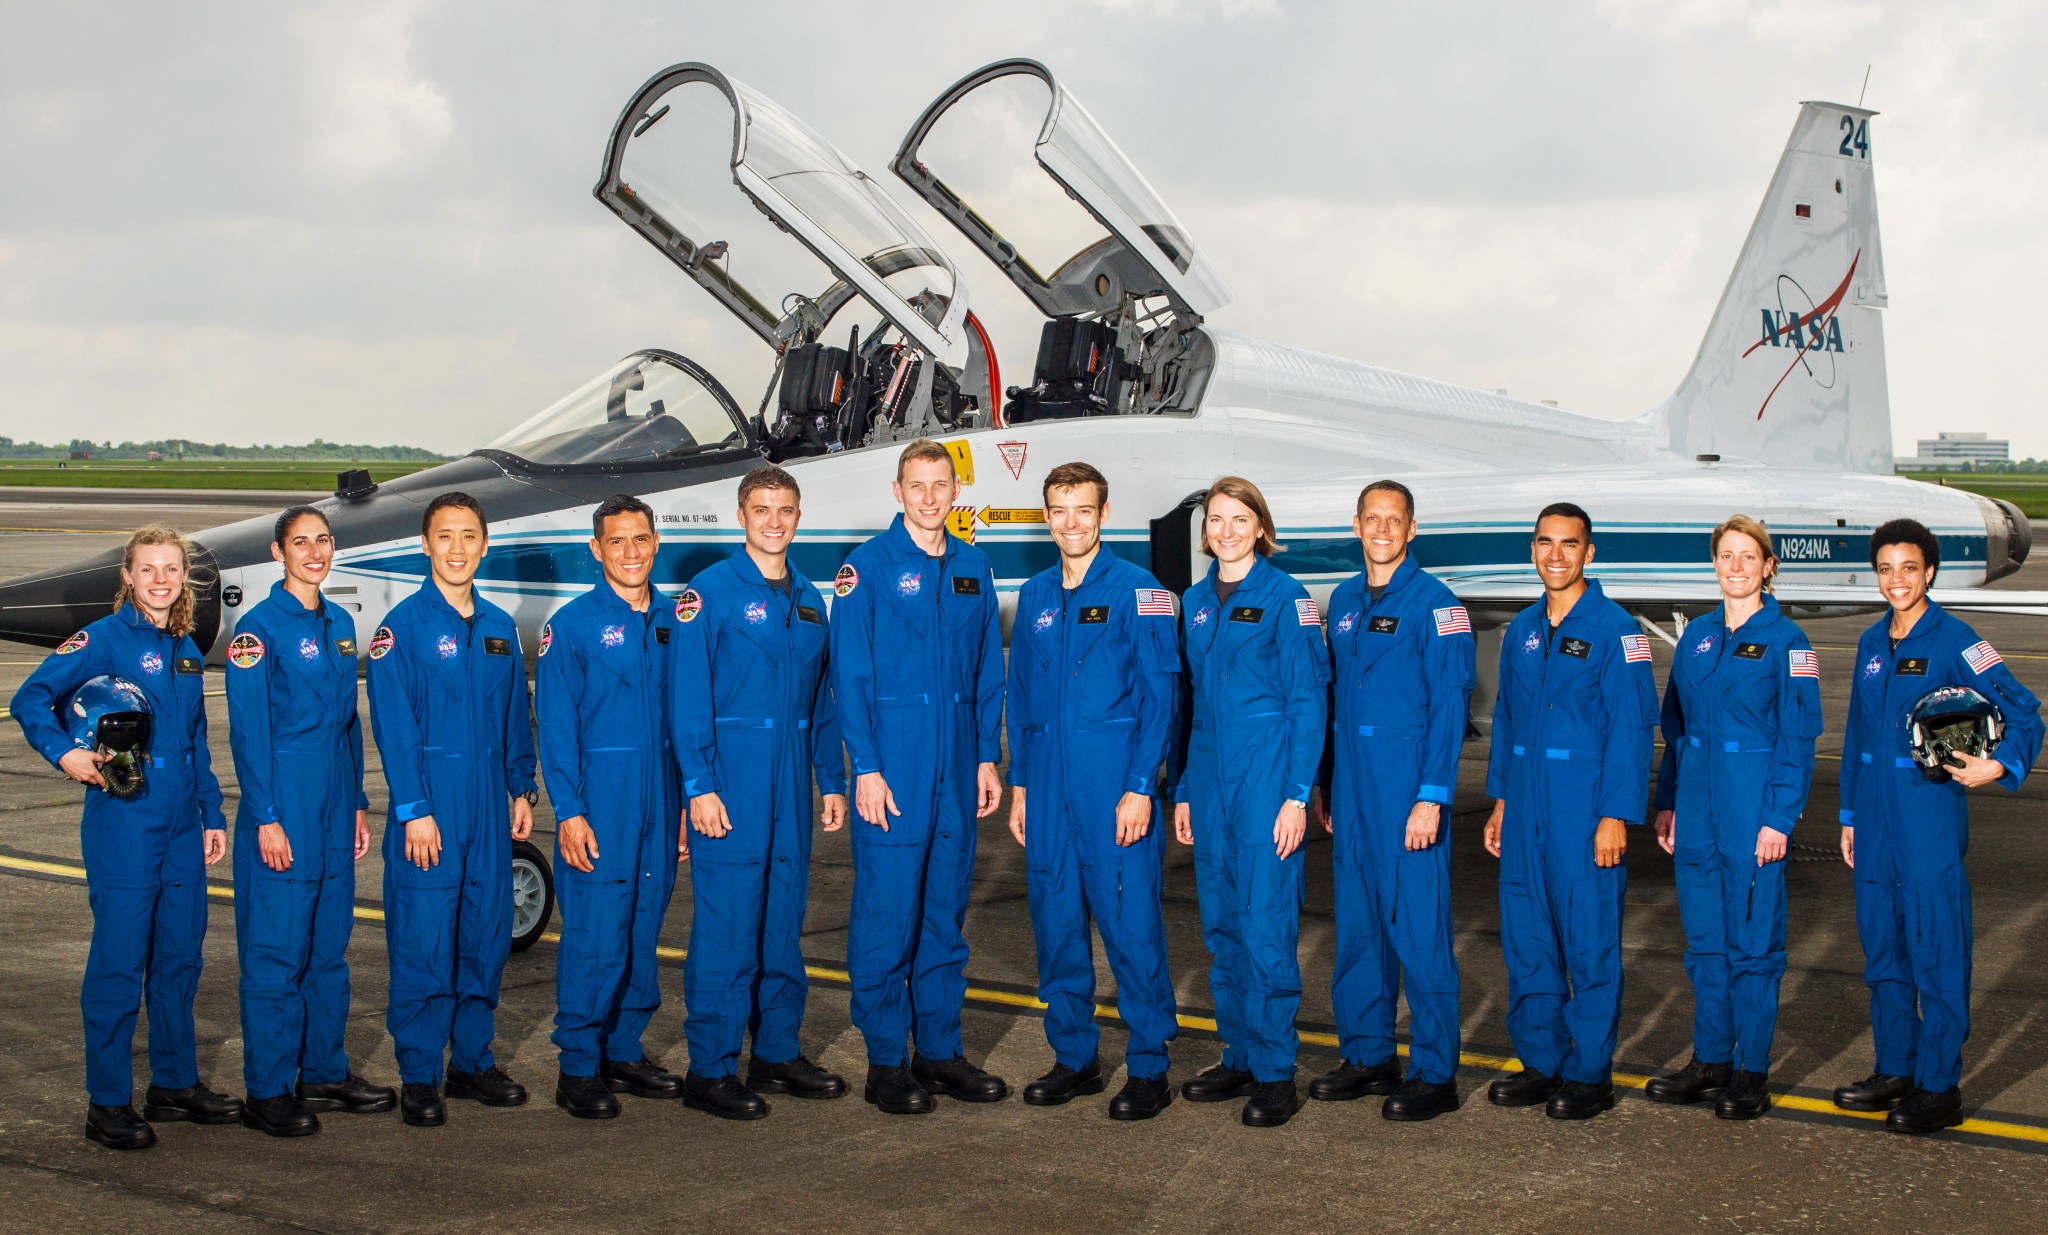 America's Most Recent Class of Astronauts